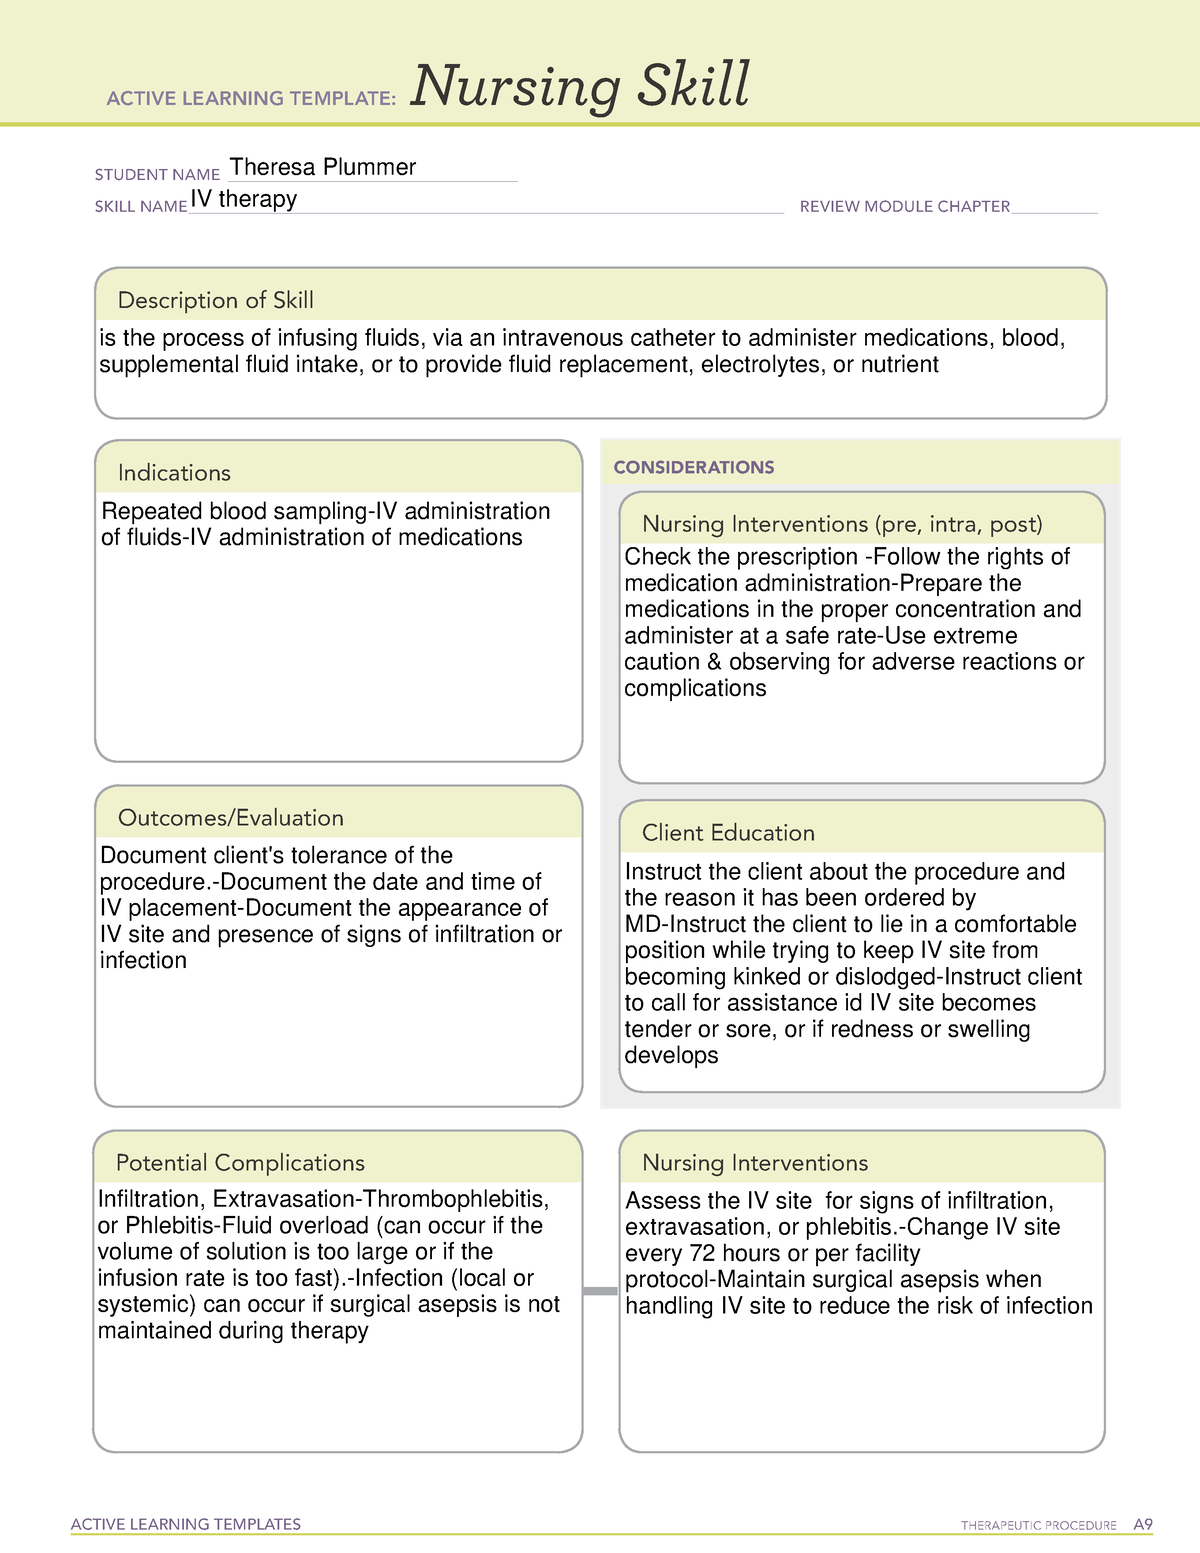 Nursing Skill IV therapy ACTIVE LEARNING TEMPLATES THERAPEUTIC